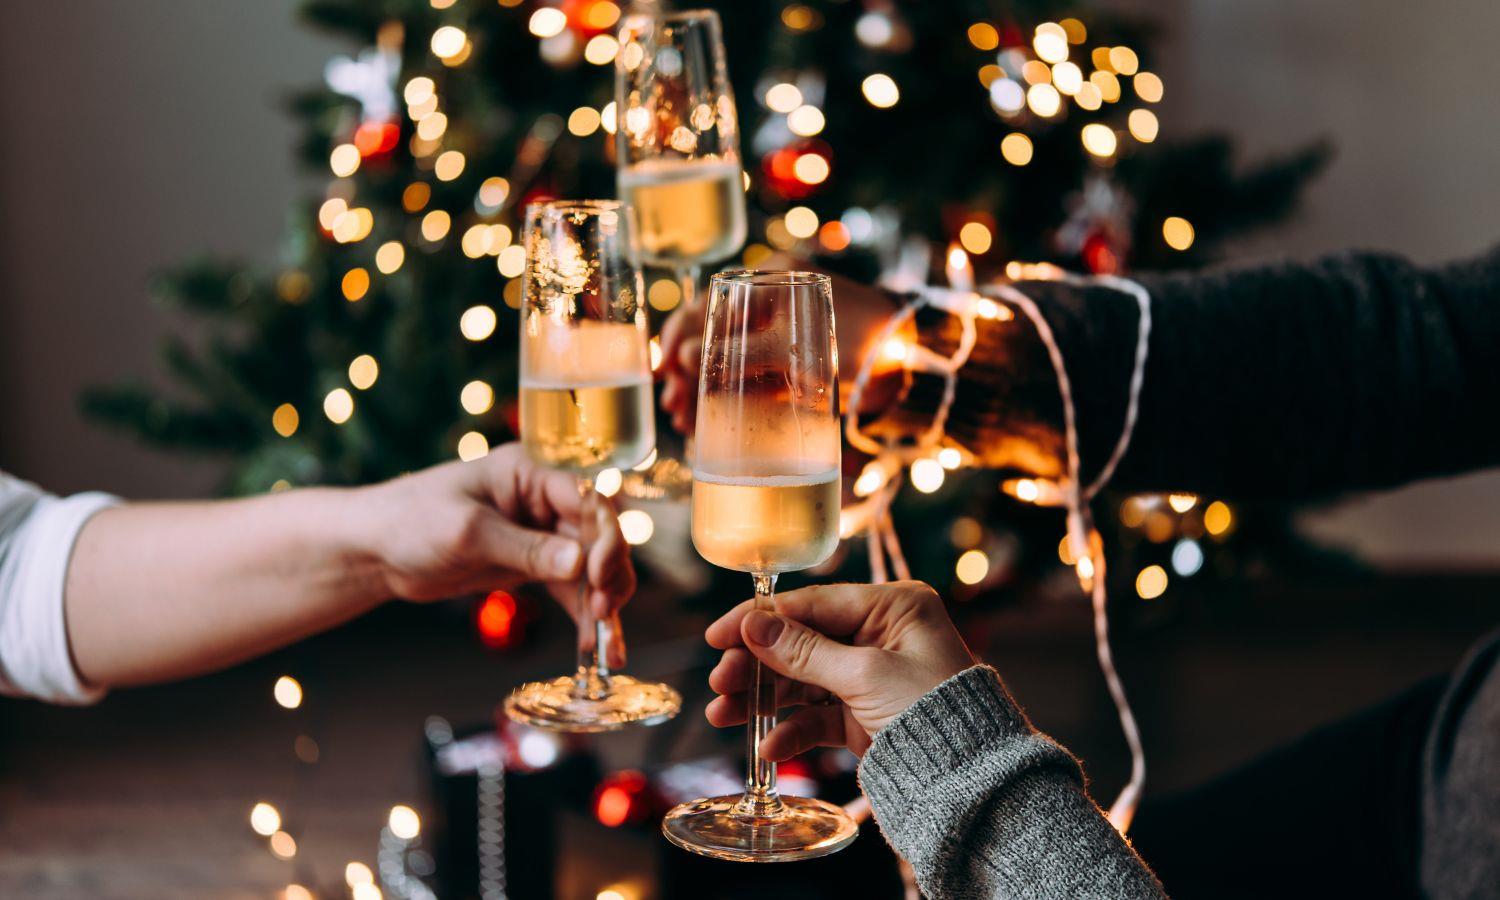 Three people holding Champagne glasses in front of a Christmas tree